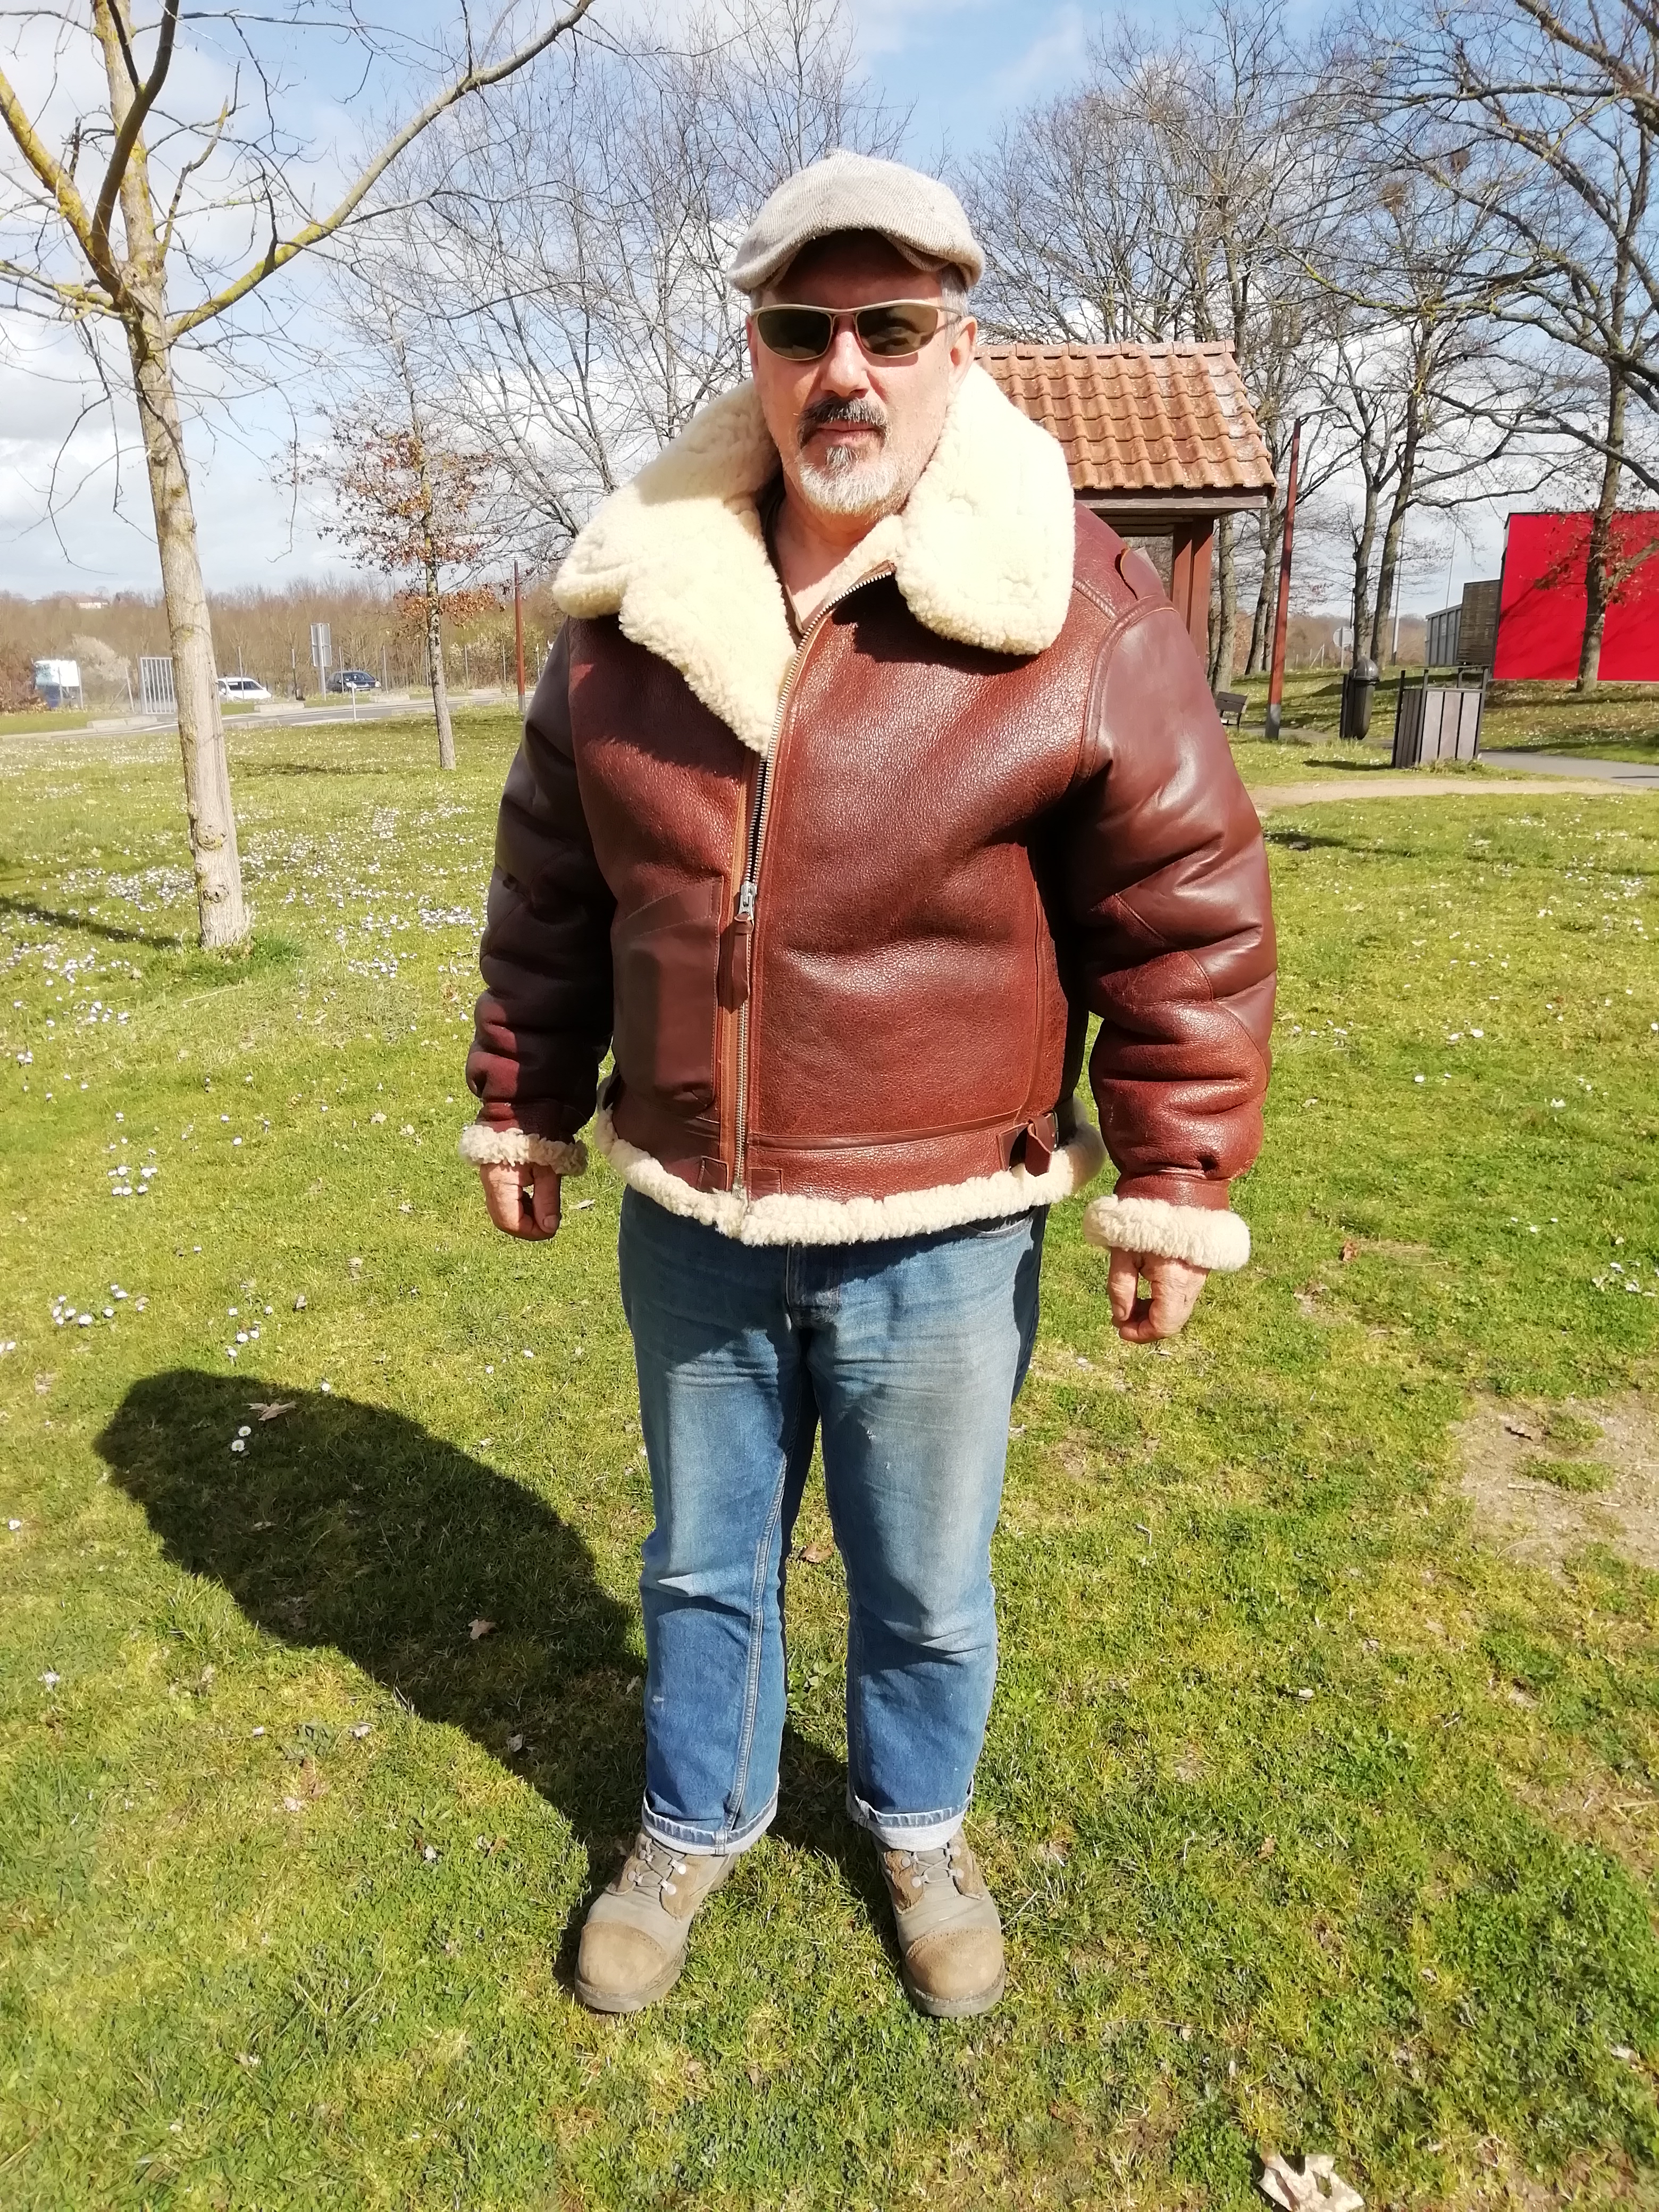 First Pic of my new B-3 | Page 2 | Vintage Leather Jackets Forum